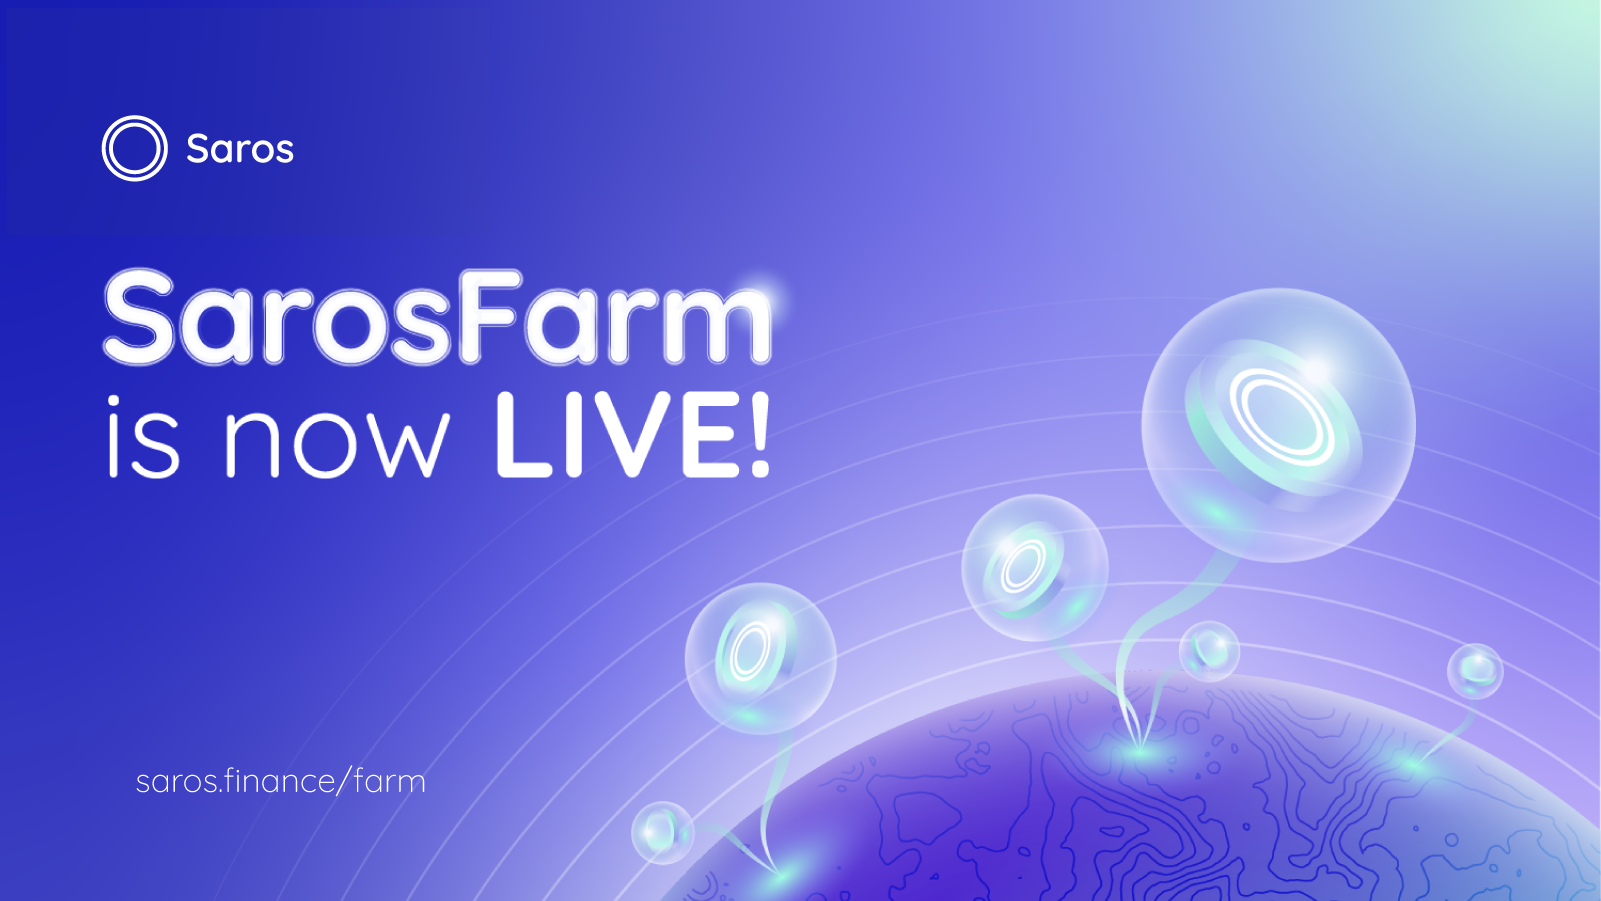 SaroFarm is now LIVE! Earn 20,000 C98 with the first farming pool C98 - USDC